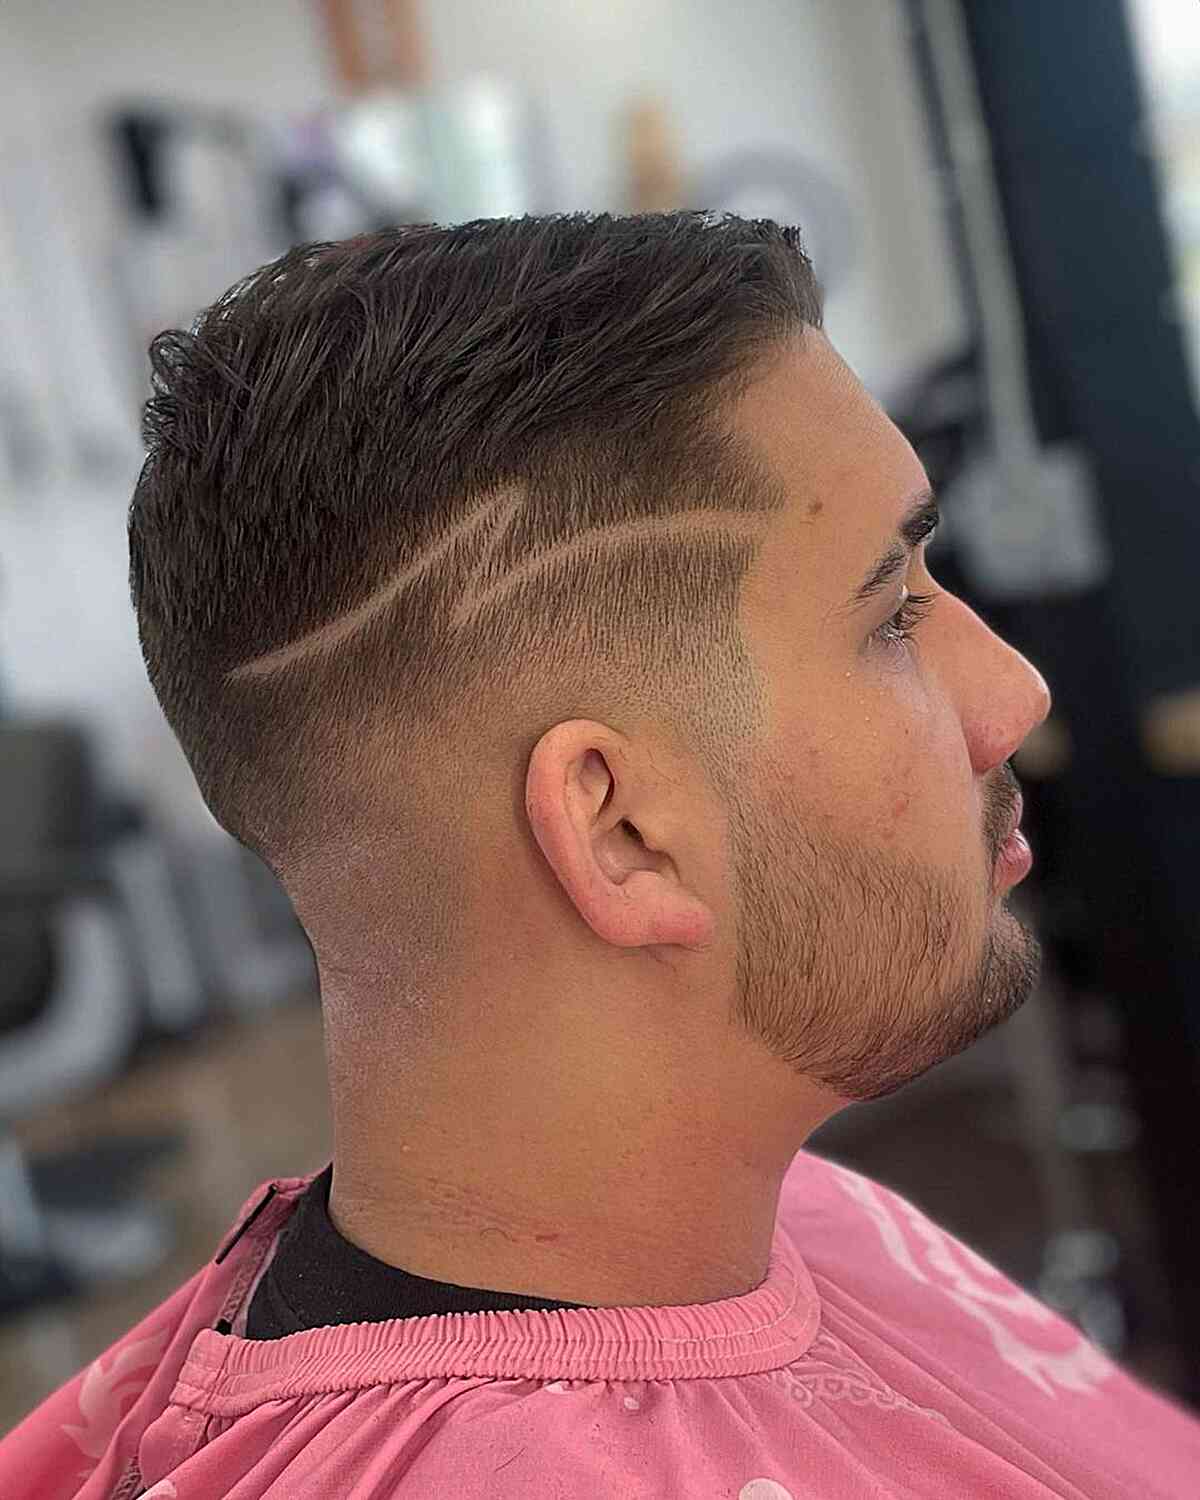 41 Types of Short Fade Haircuts + Trendy Ways Guys Can Get It